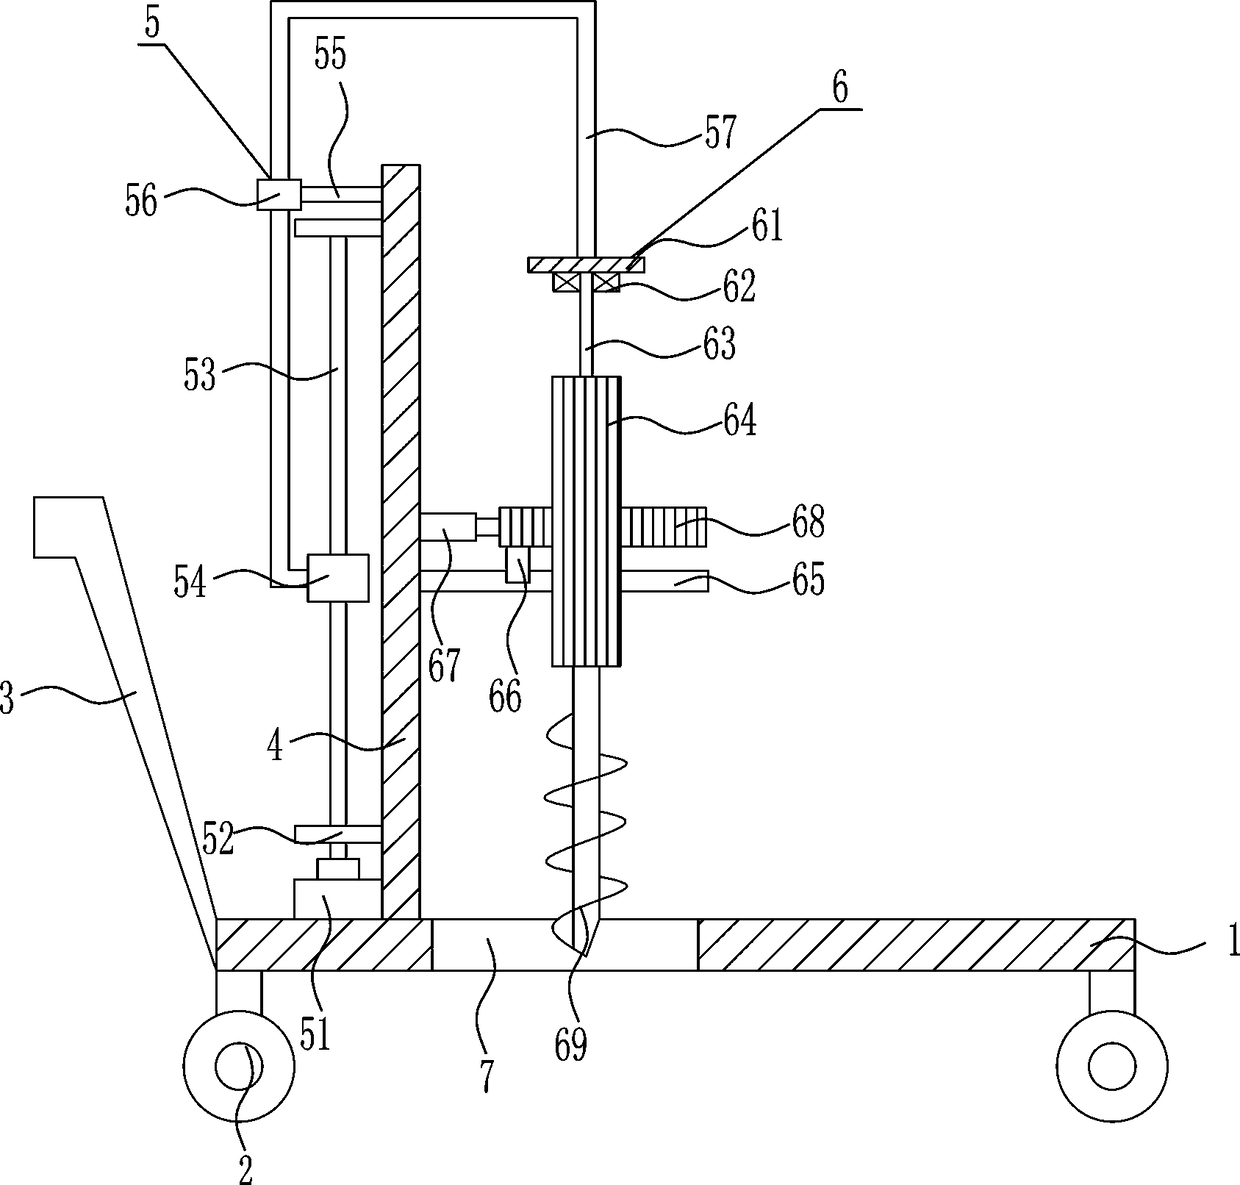 Soil sampling device for laying of hydraulic engineering pipelines